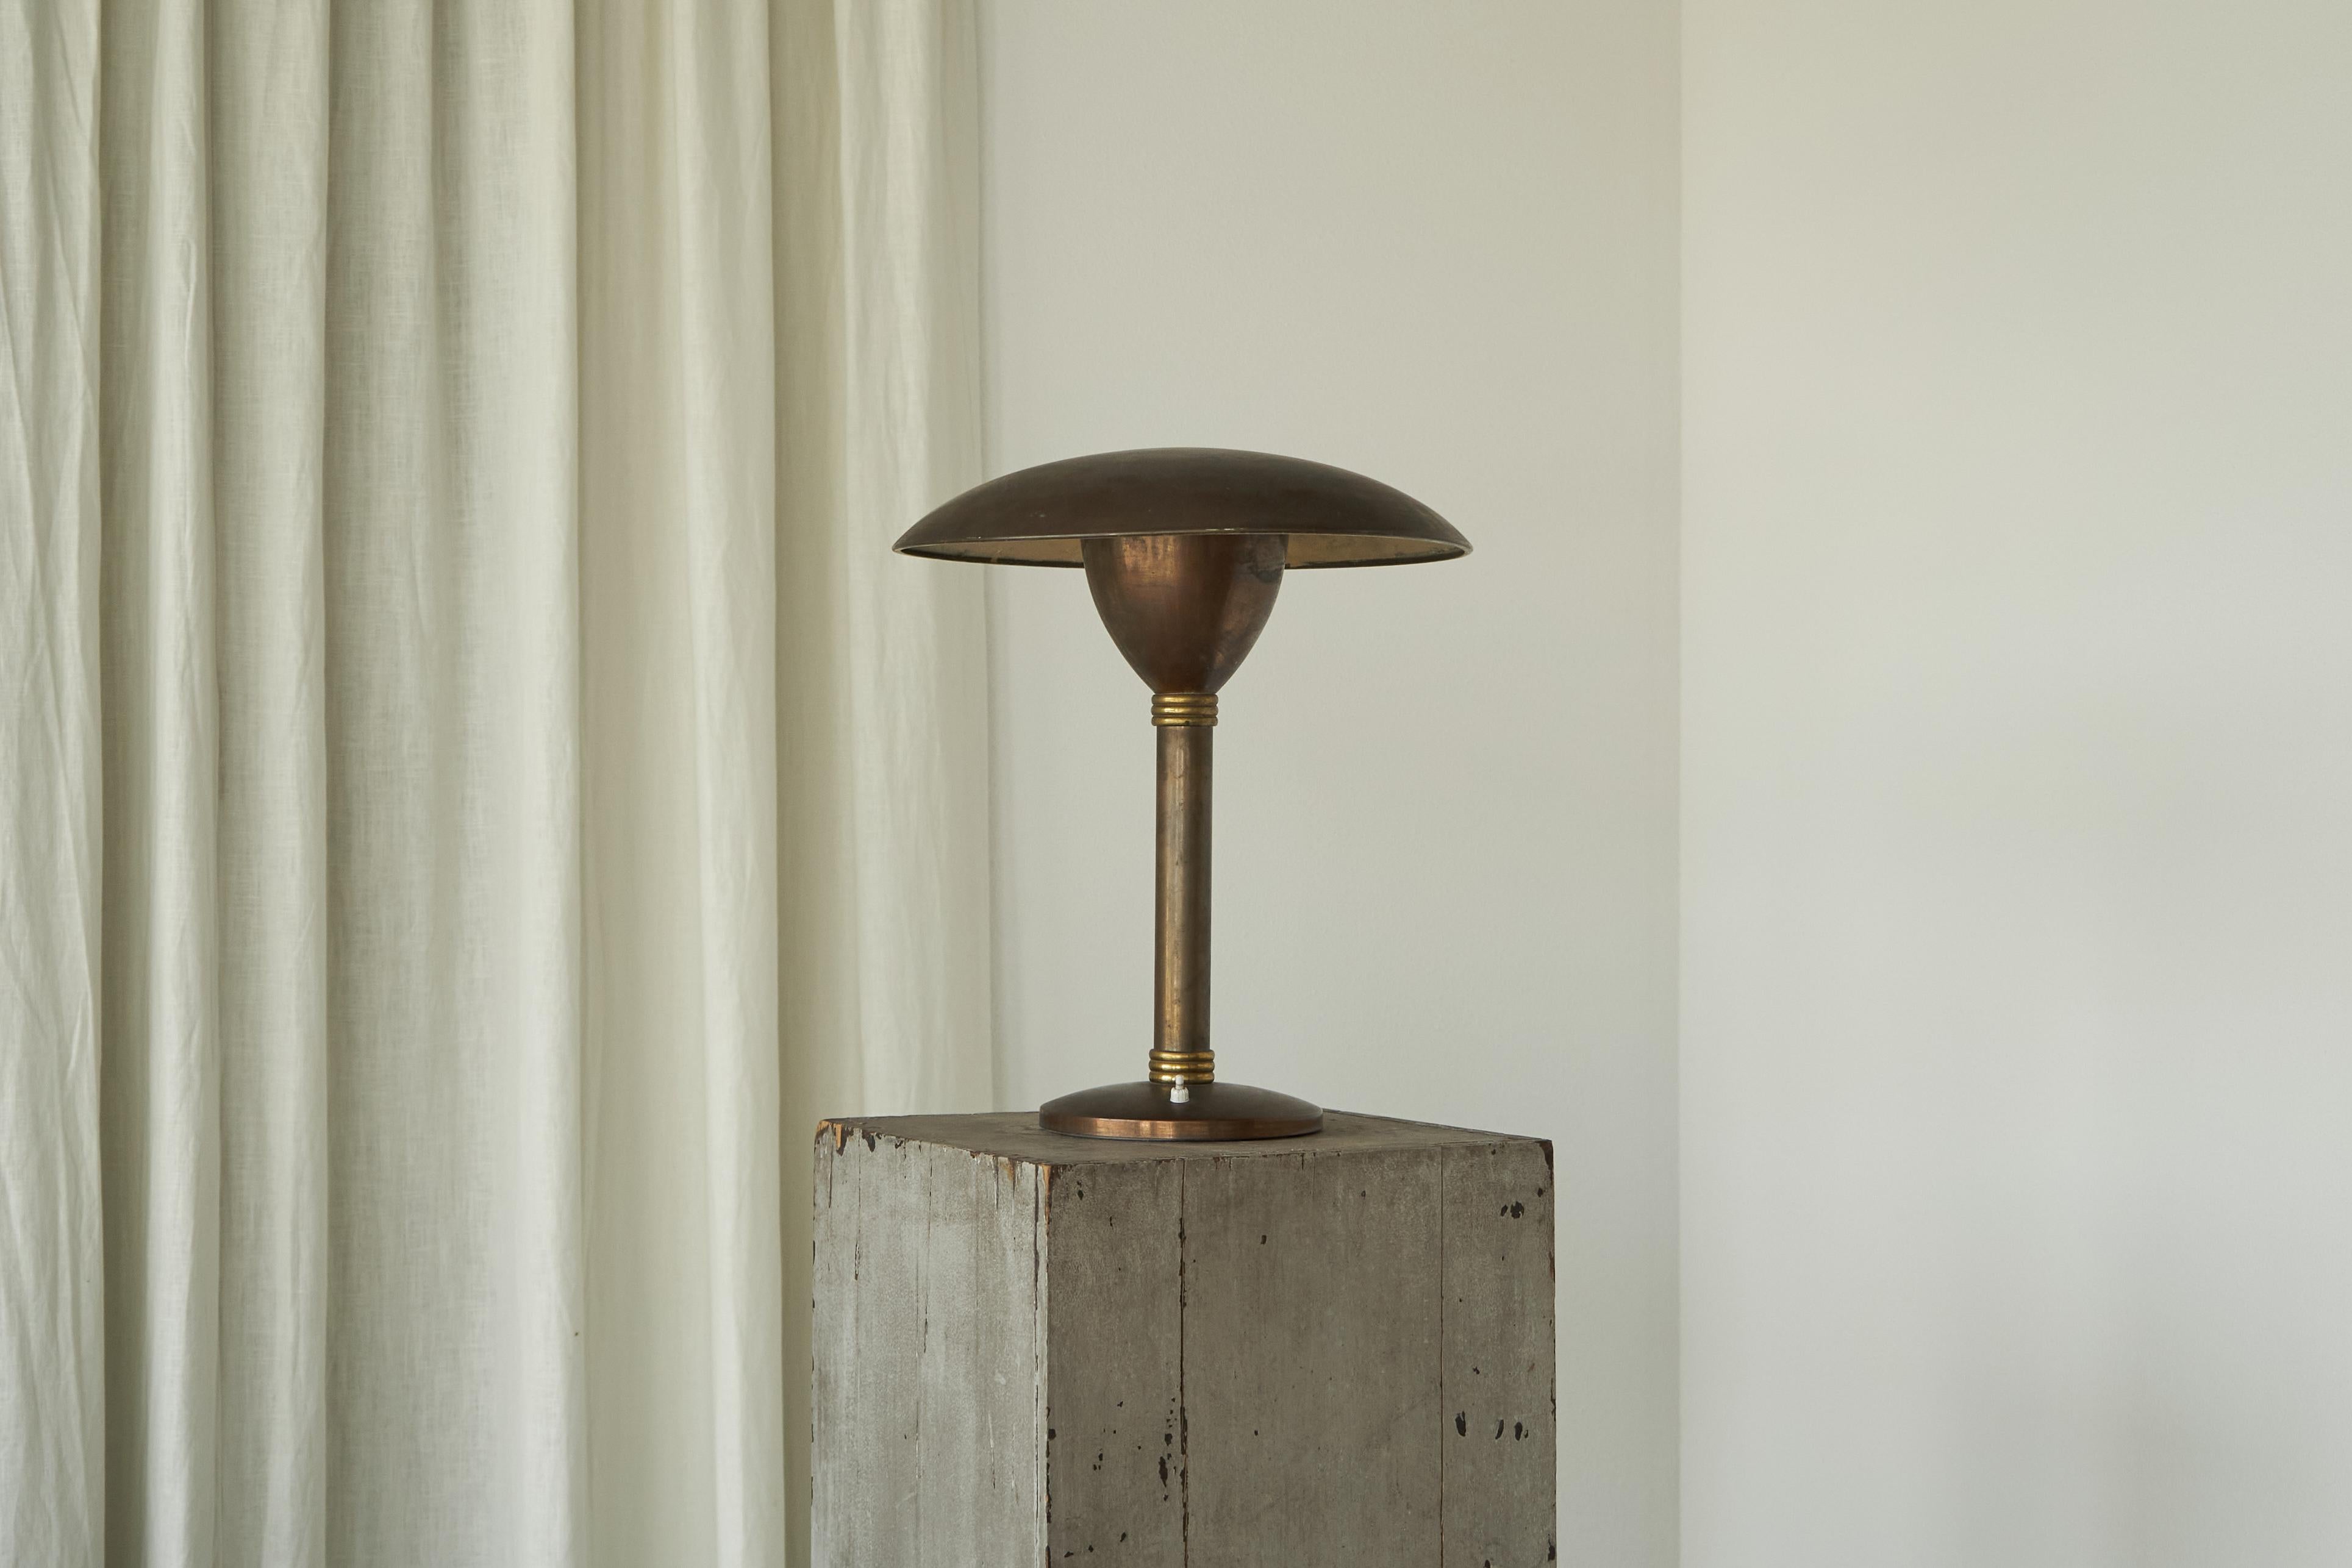 Large Art Deco Table Lamp in Patinated Brass, Italy, 1930s.

This is a wonderful and rare Italian table lamp in a distinct art deco style. The shape is simple, but interesting at the same time. 

A delicate and well-proportioned design that also